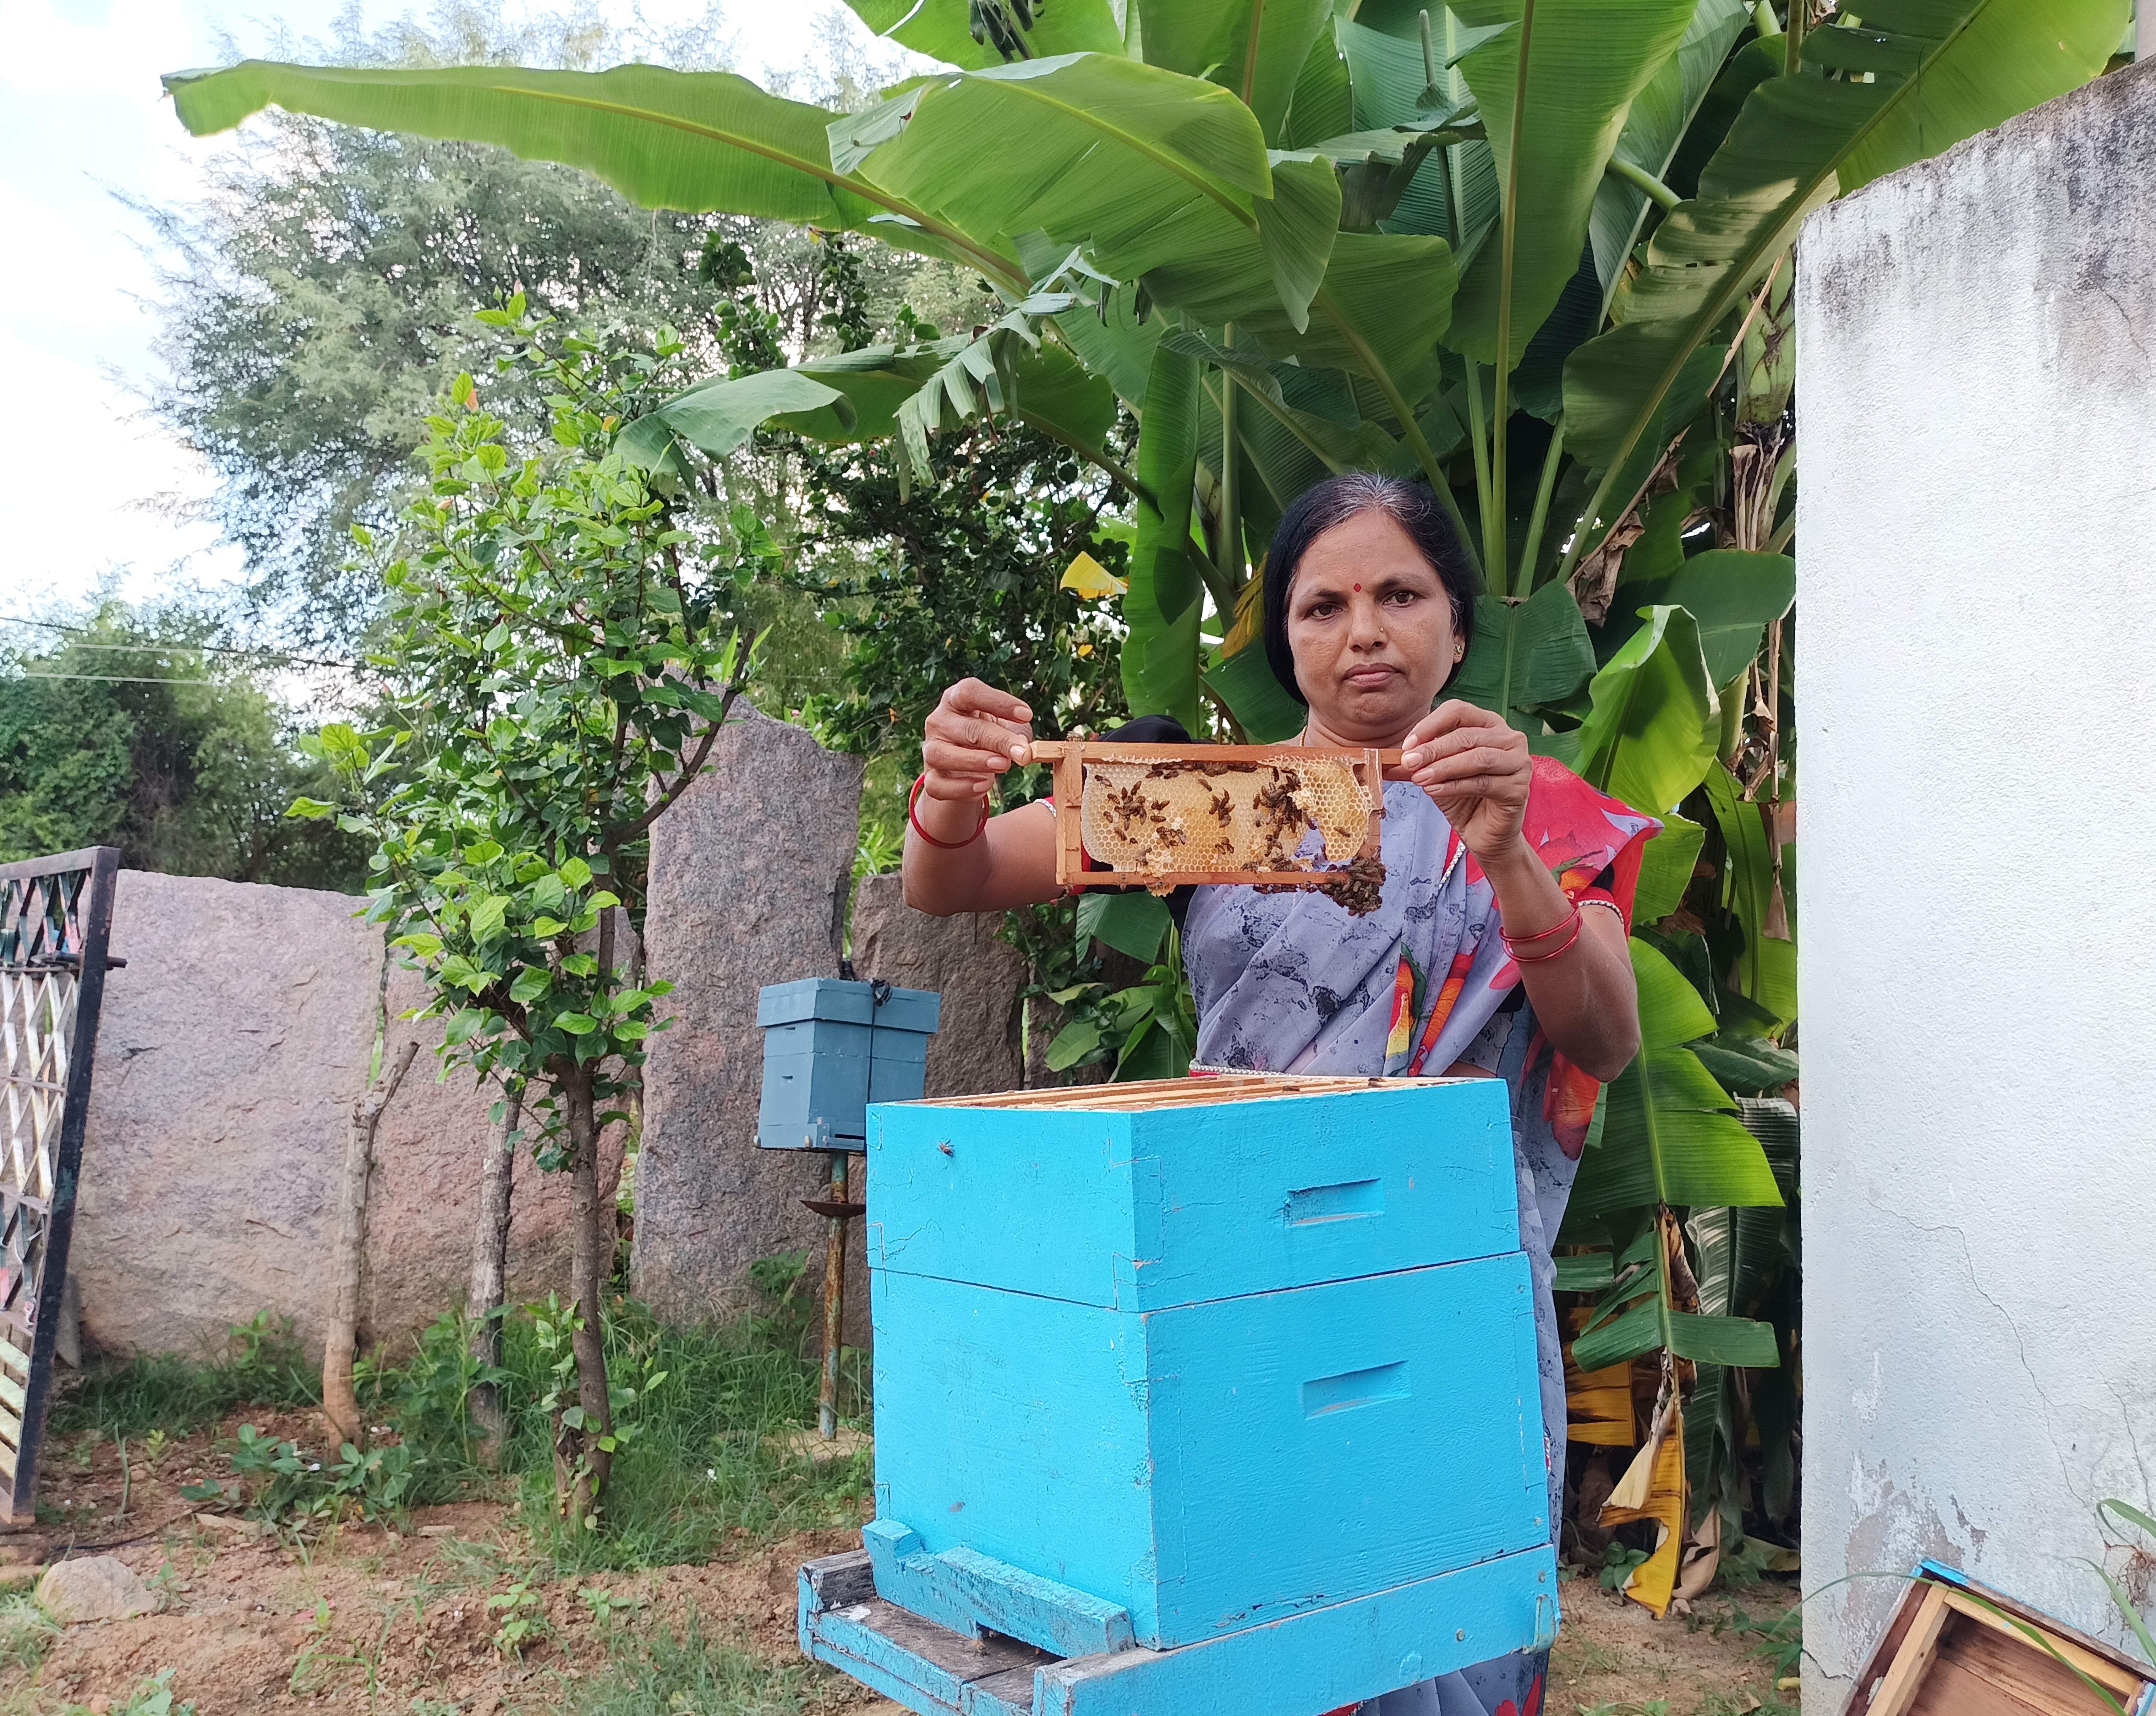 Savitramma, an avid apiarist and entrepreneur has built a sustainable honey business